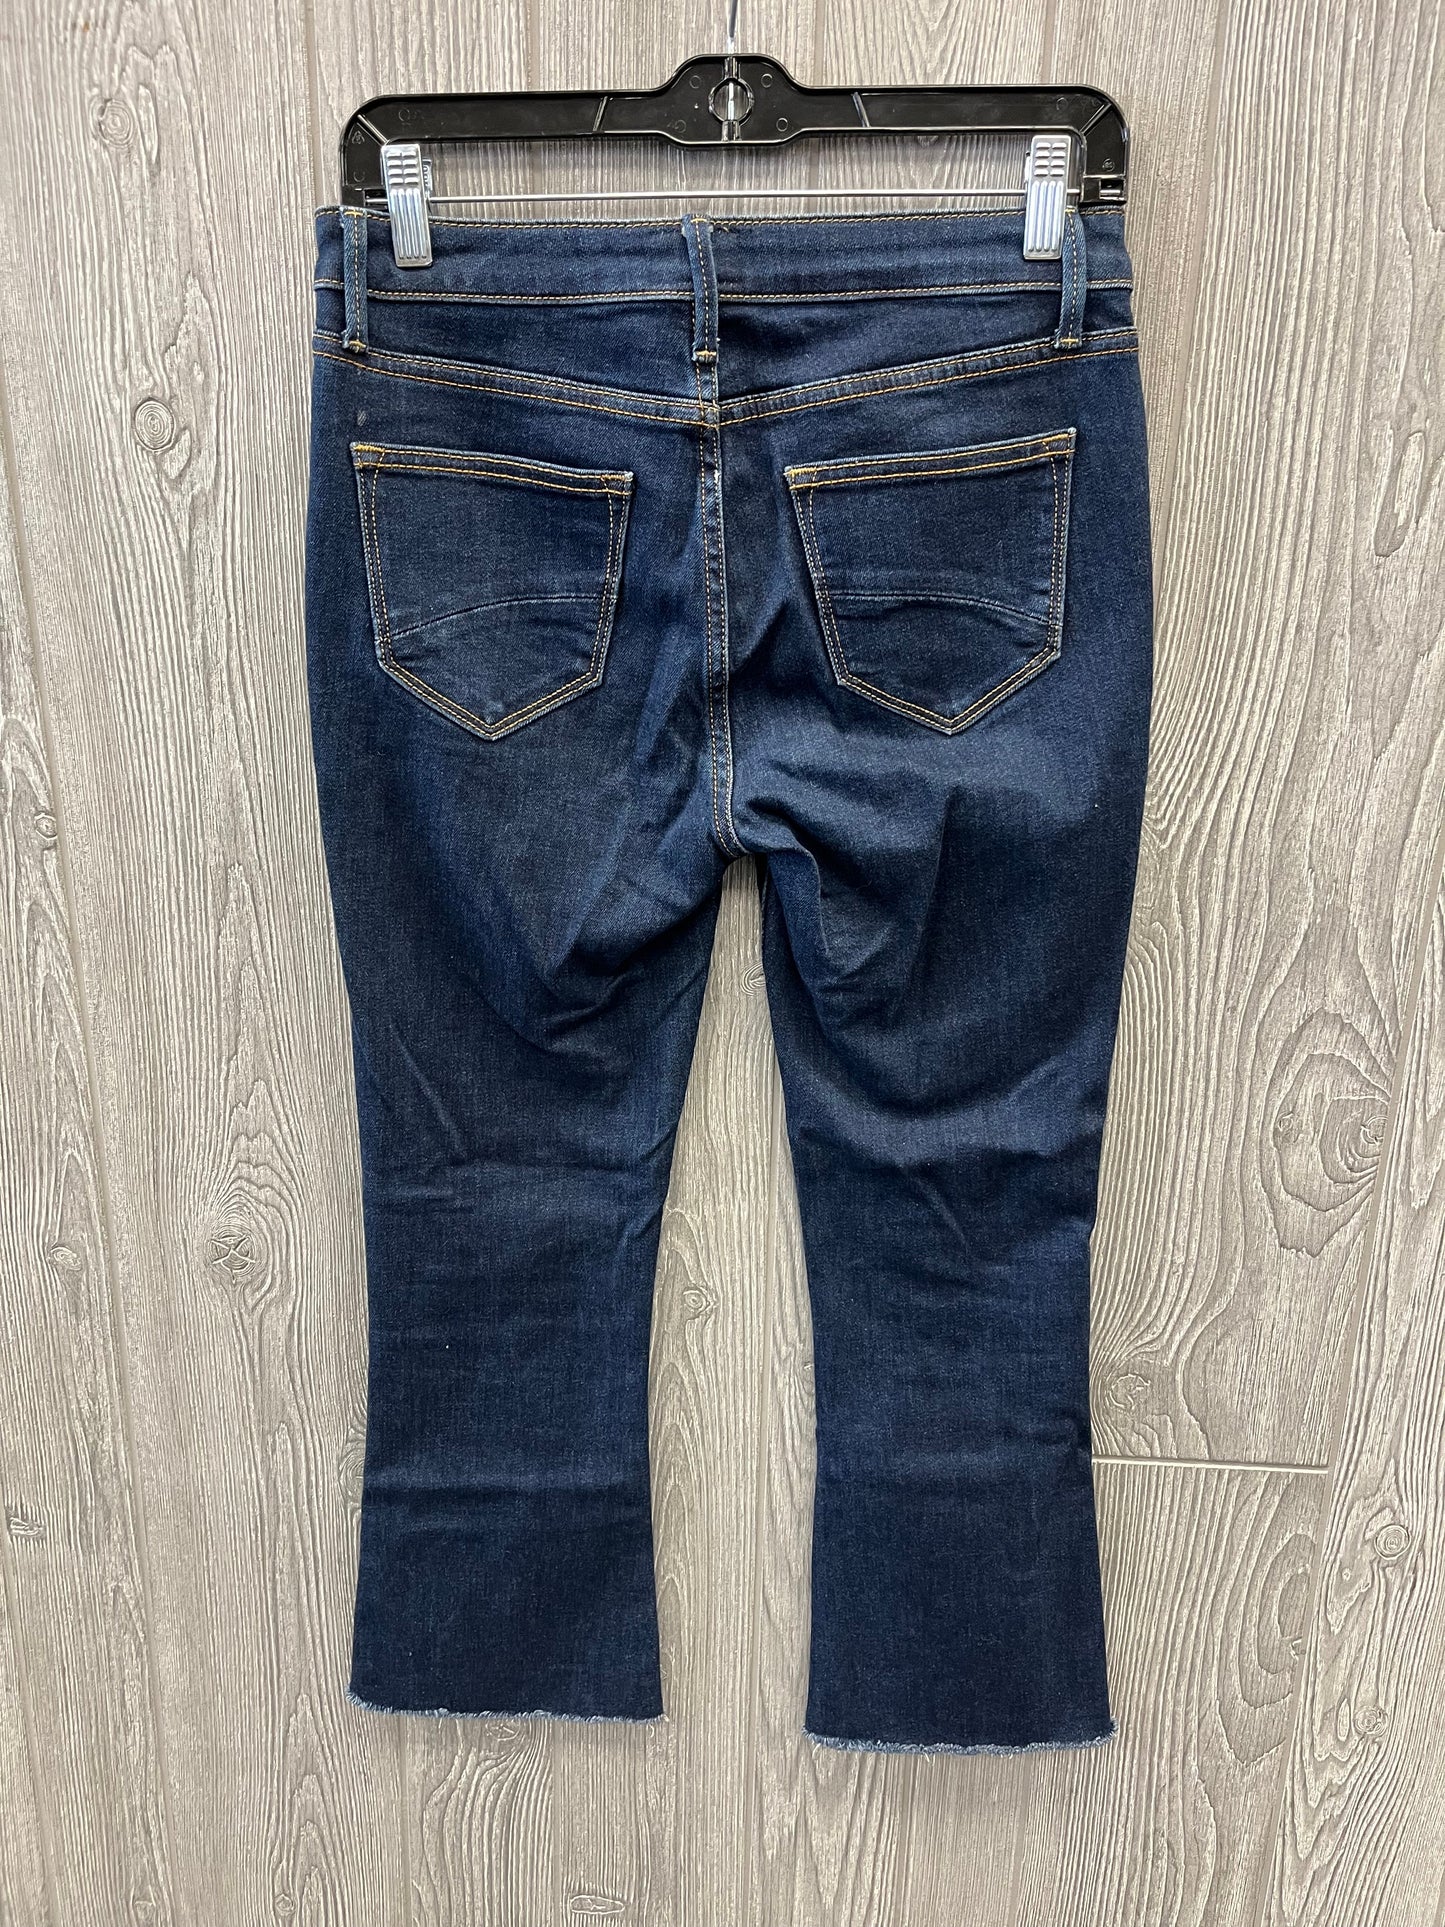 Jeans Designer By Driftwood  Size: 2